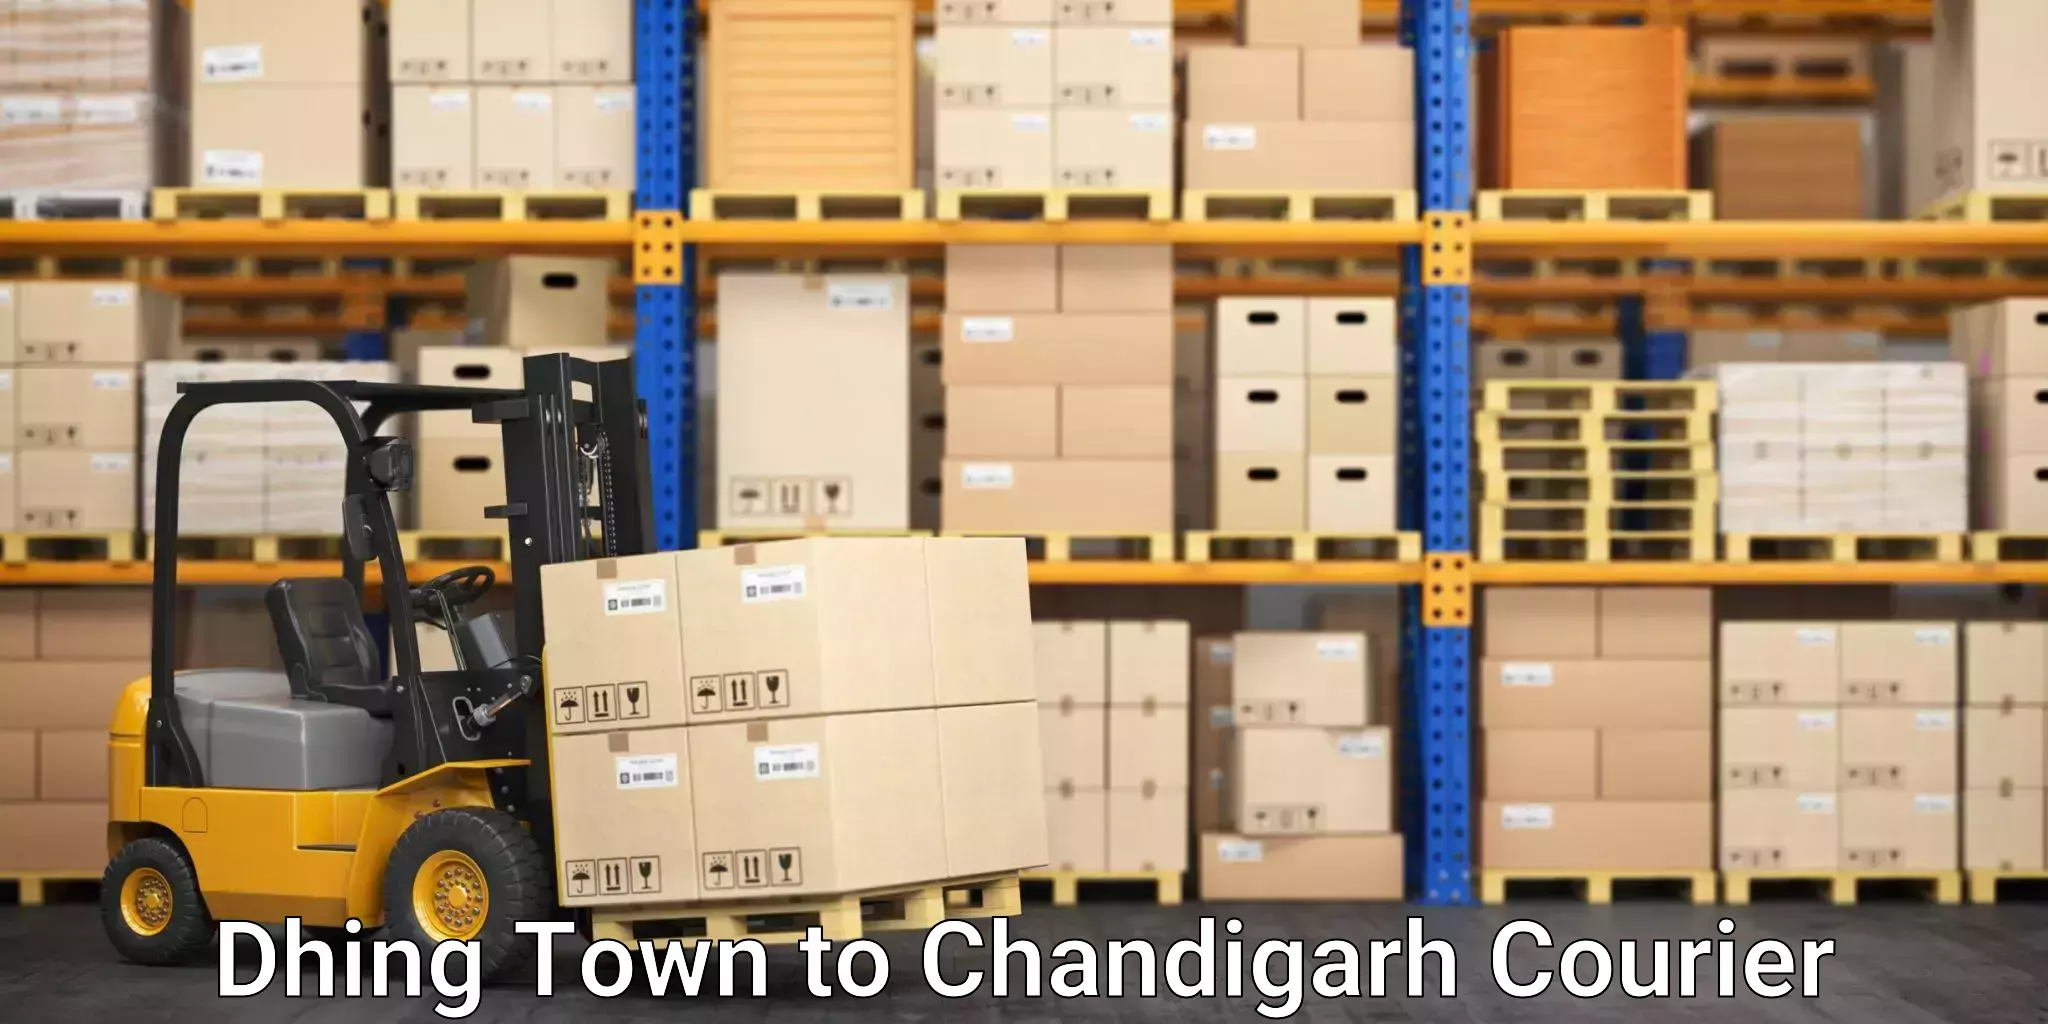 Quick dispatch service Dhing Town to Chandigarh